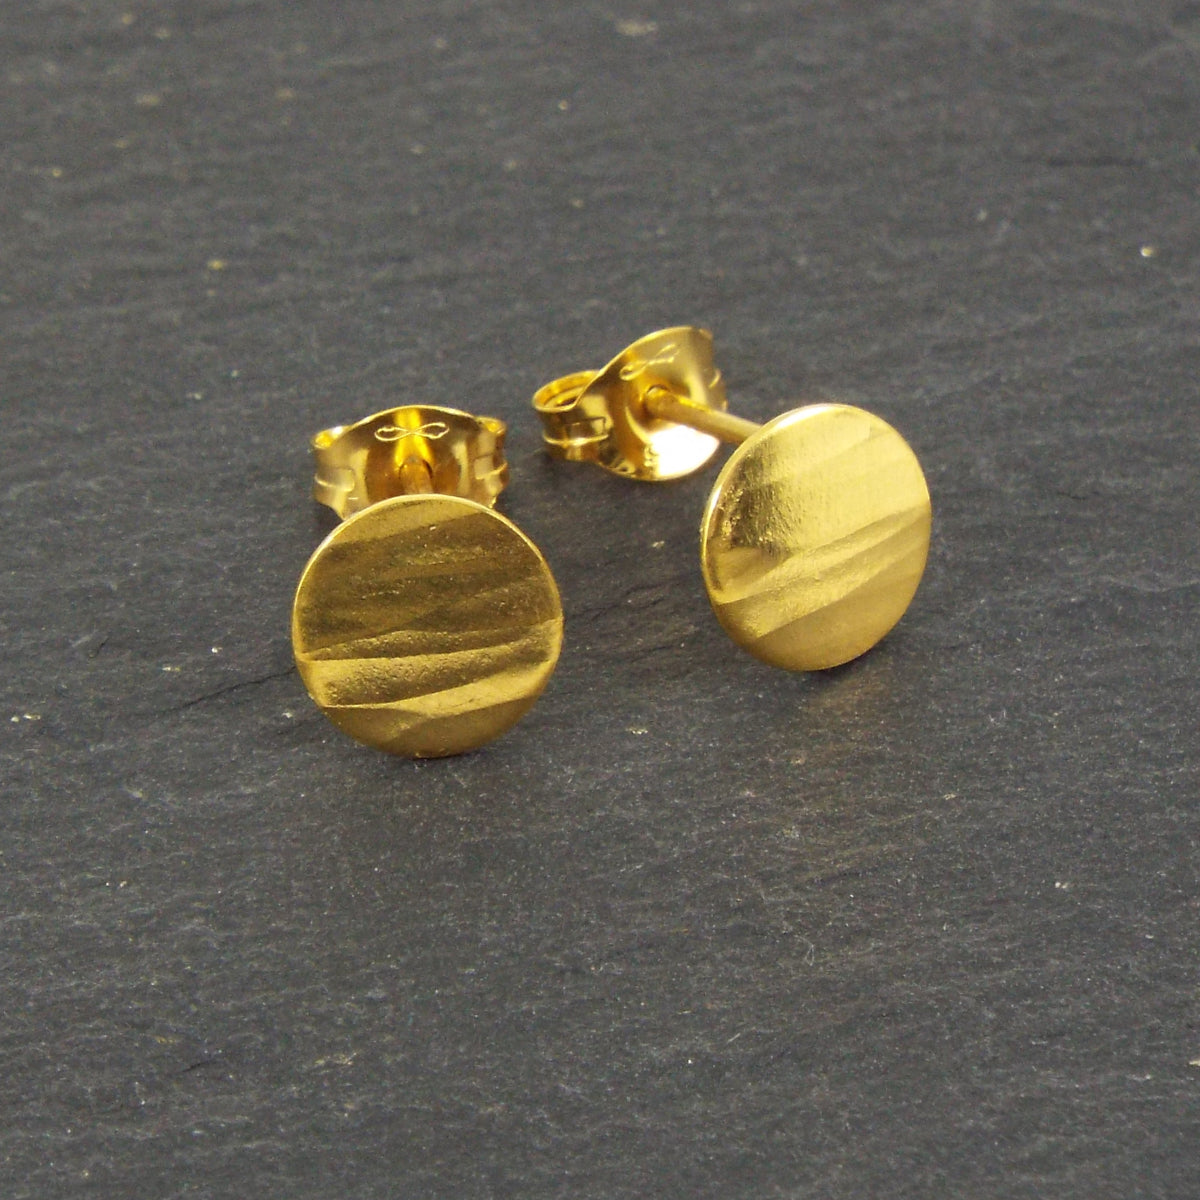 A pair of disc-shaped hammered silver earrings, 7.5mm across, plated with yellow gold with a satin-matte finish. The hammered texture of the studs is strongly horizontal.